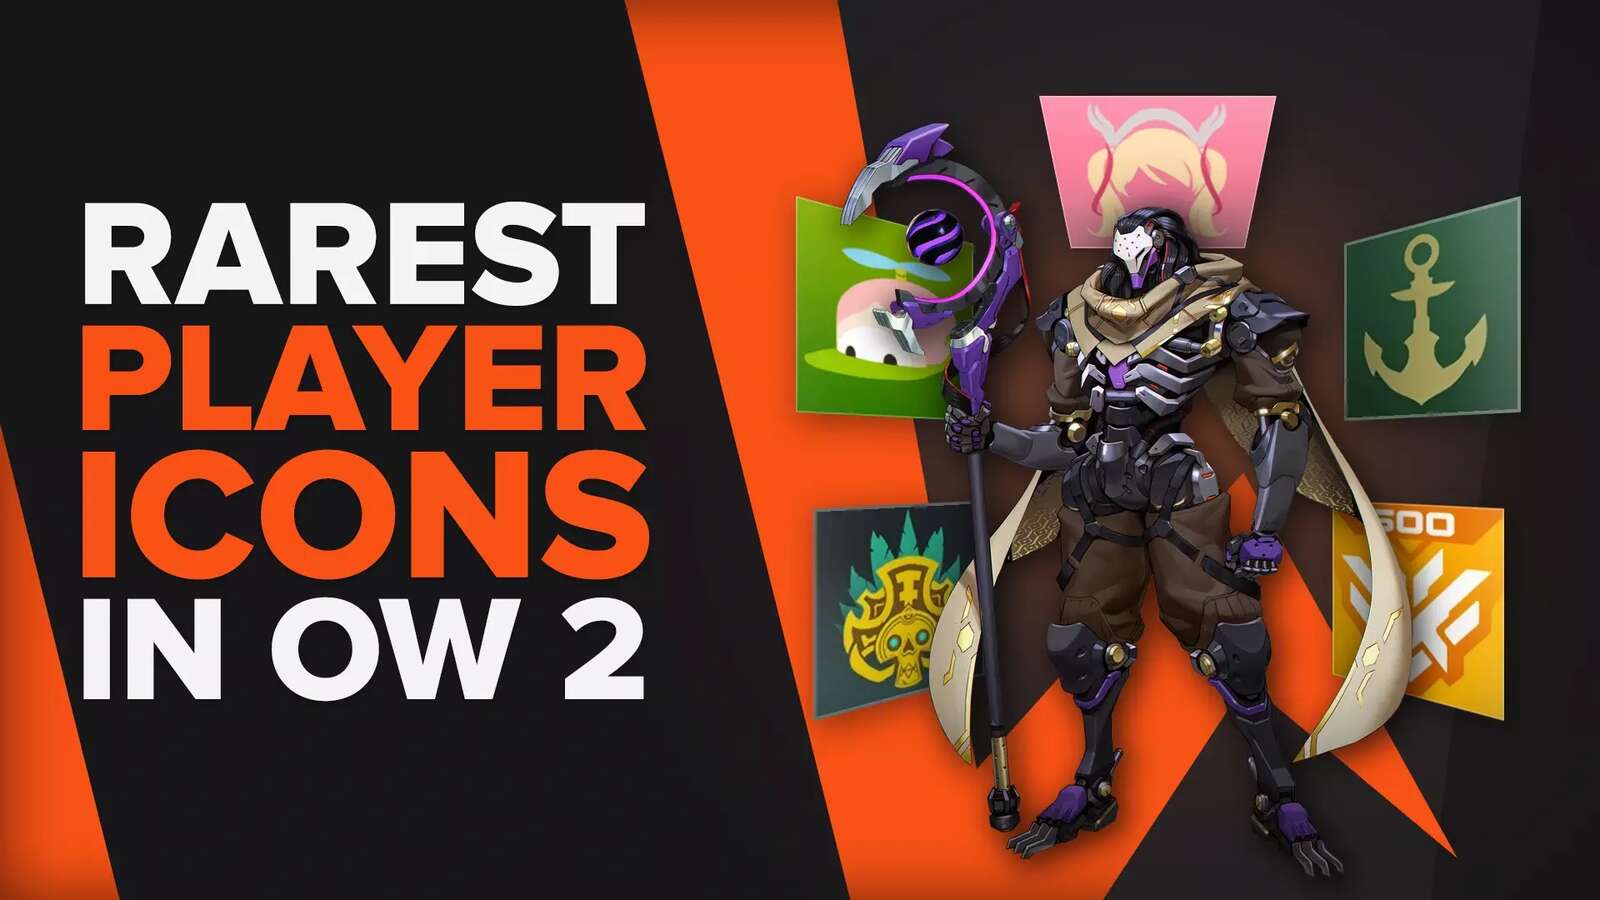 The 5 Rarest Player Icons in Overwatch 2